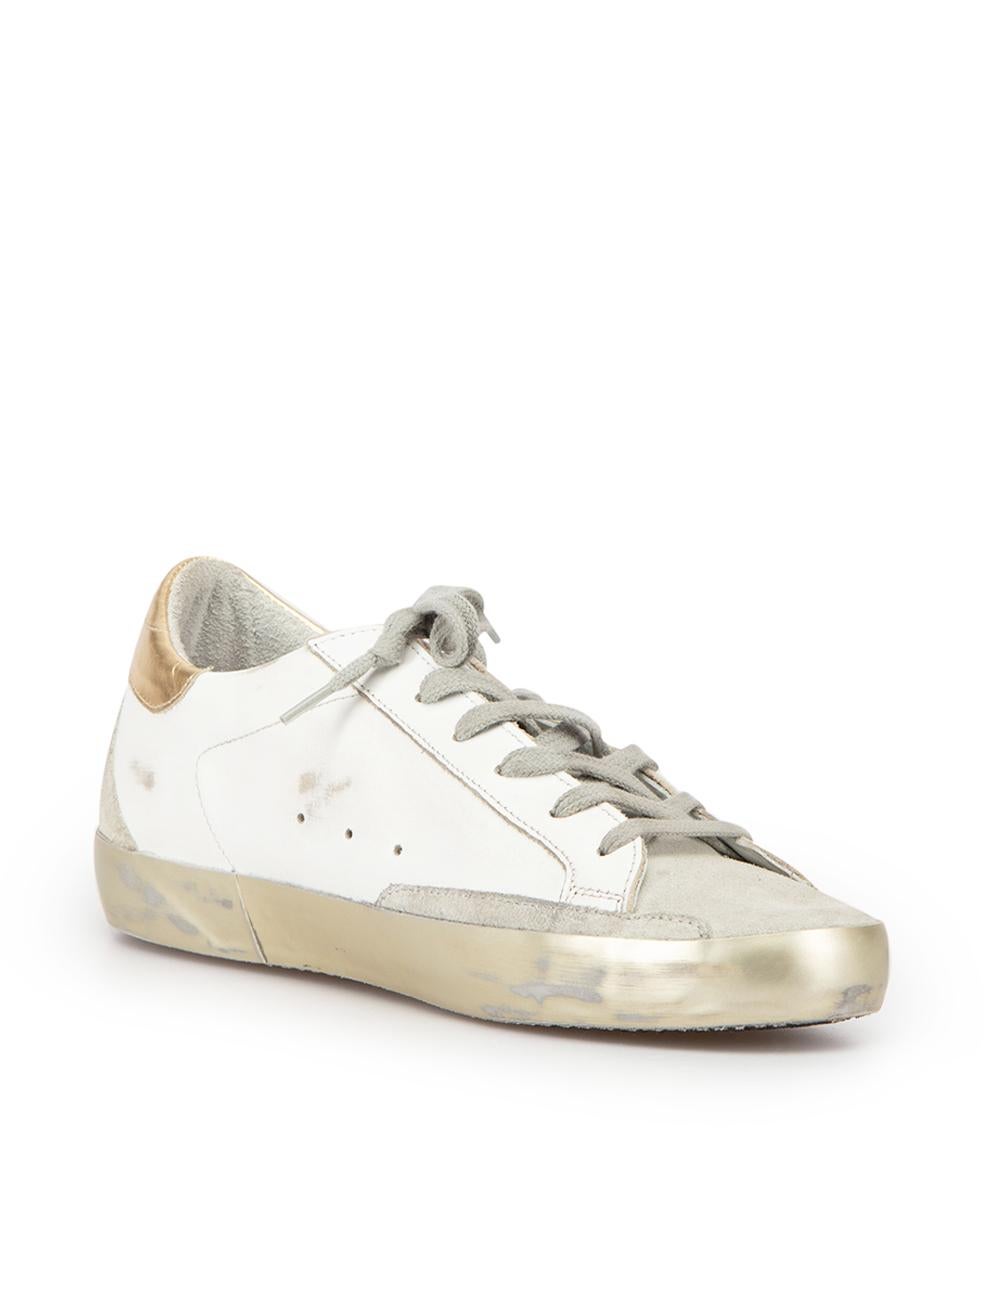 CONDITION is Never Worn. No visible wear to trainers is evident on this used Golden Goose designer resale item. These shoes come with original dust bag.



Details


White and gold

Leather

Low top trainers

Lace up closure

Distressed